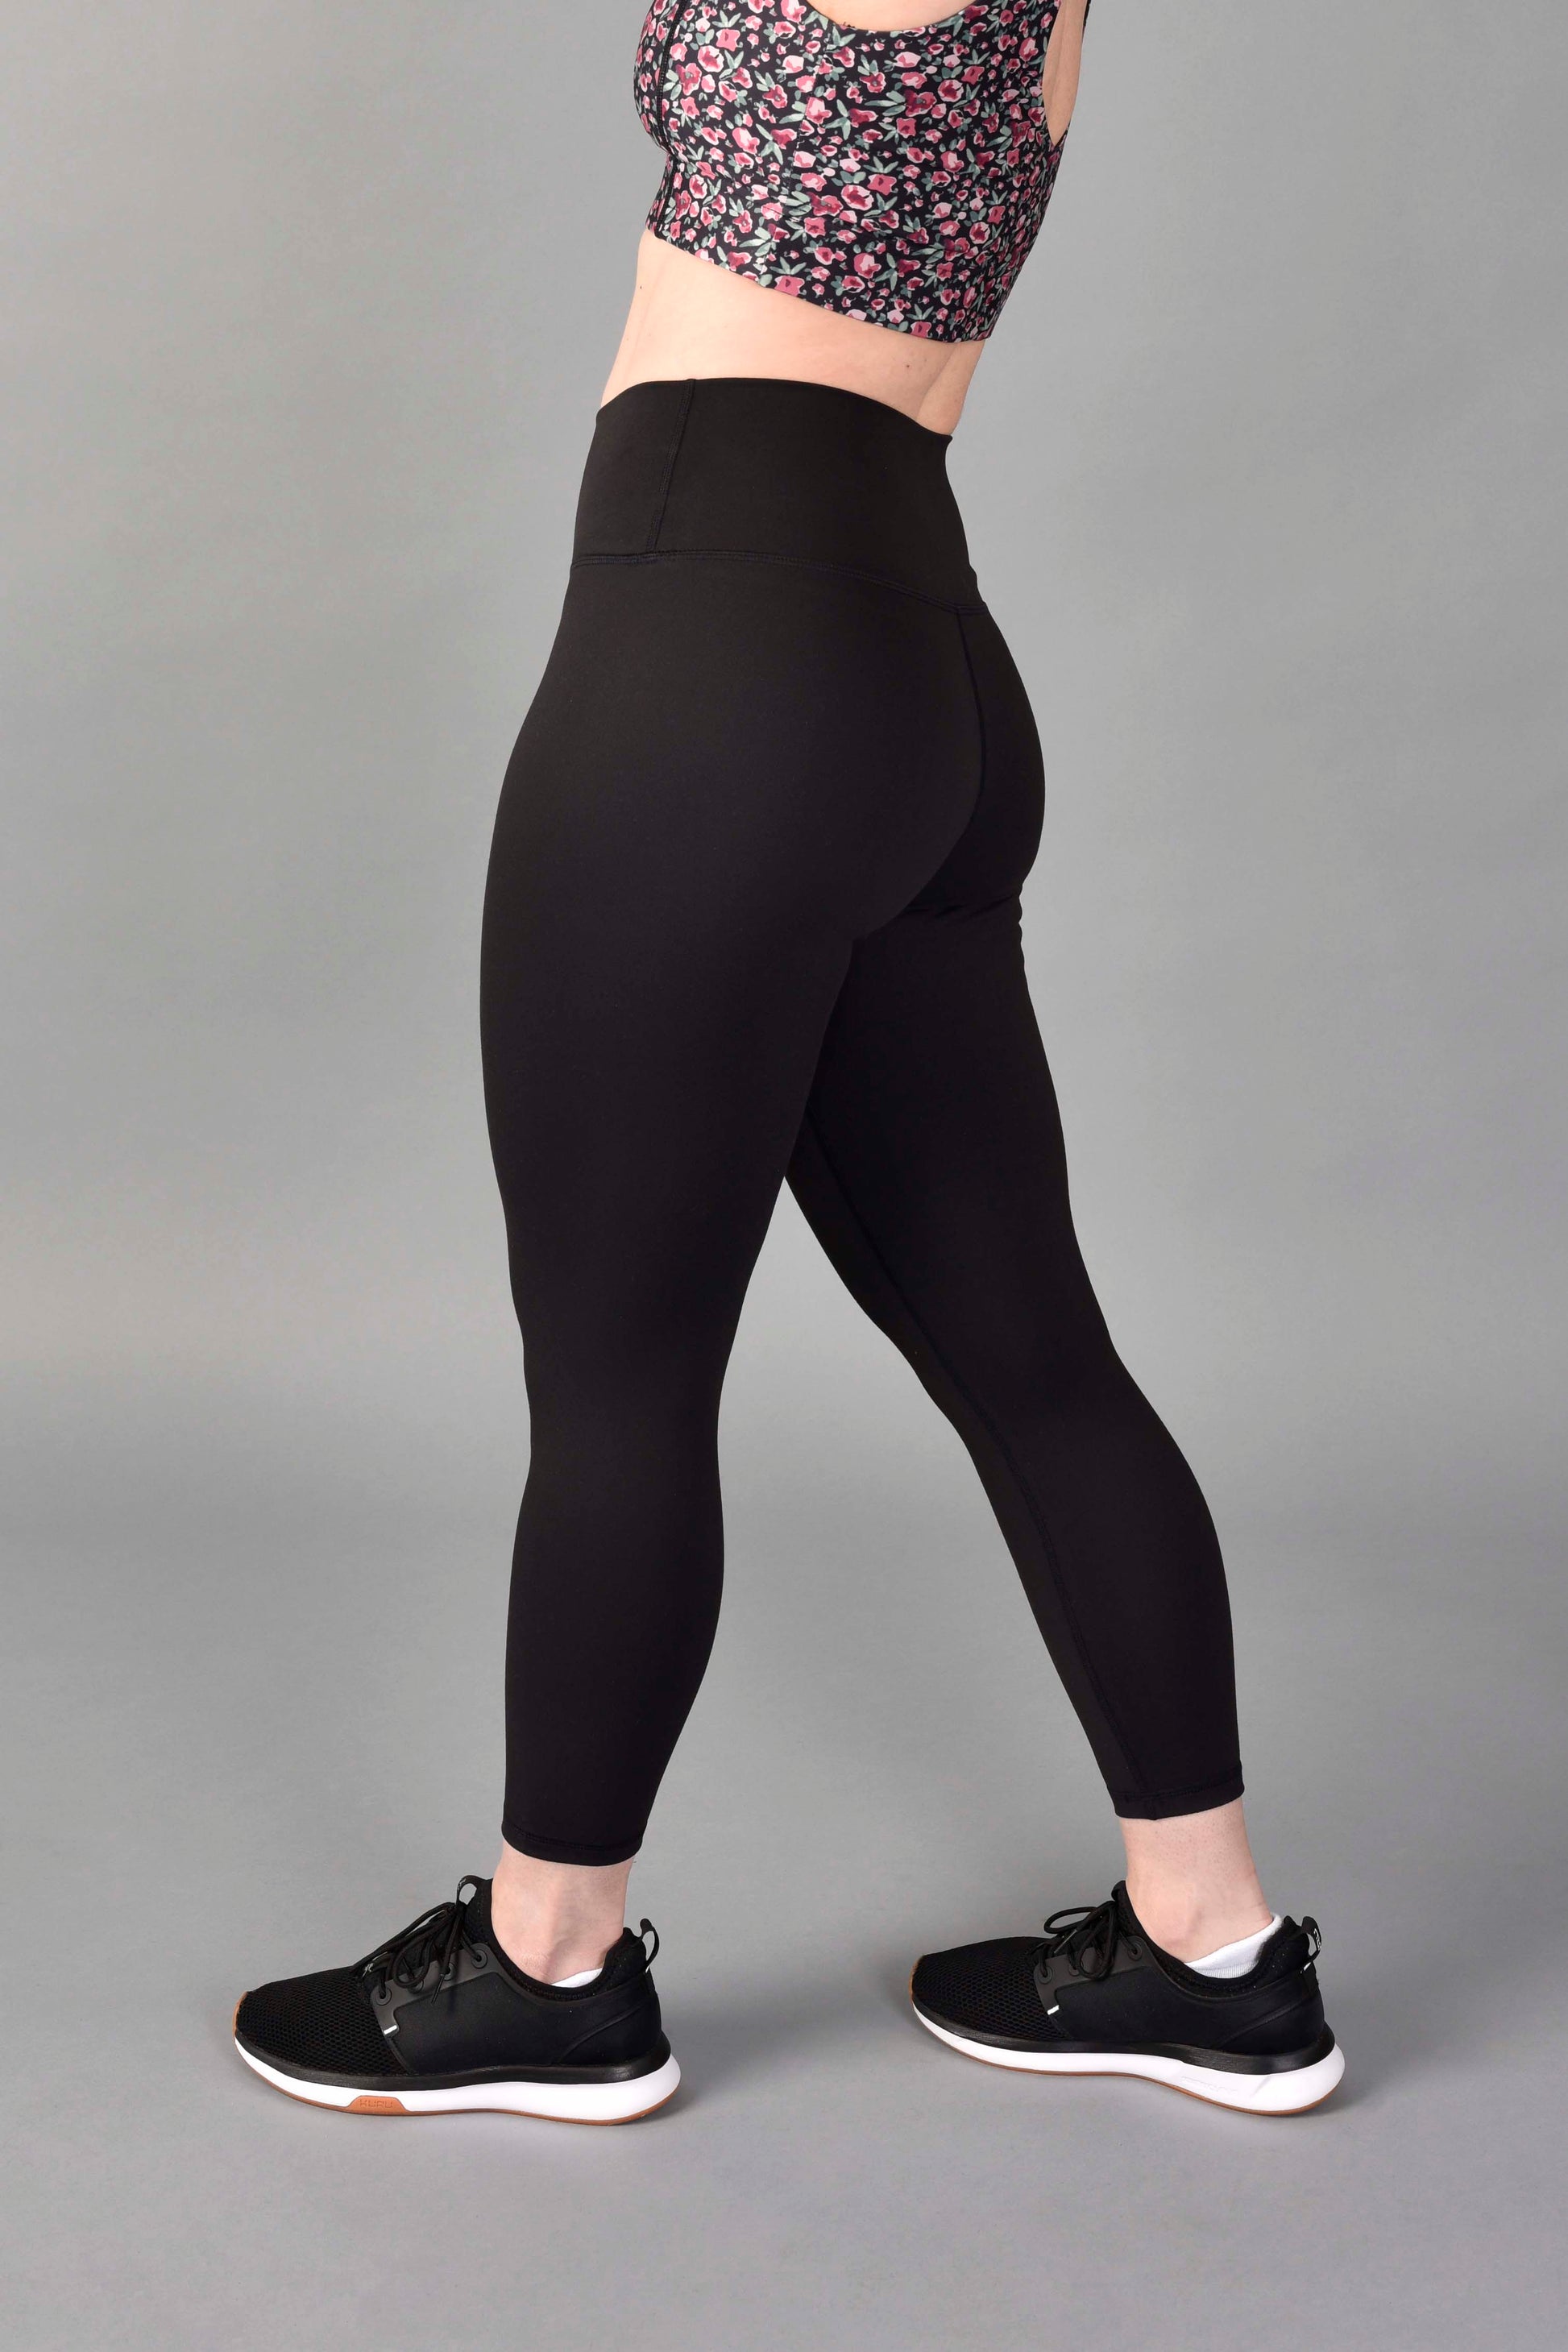 Verona Couture Women's Plus Size Bodycon Comfort Stretch Leggings, Black (2X/3X  18-24) at  Women's Clothing store